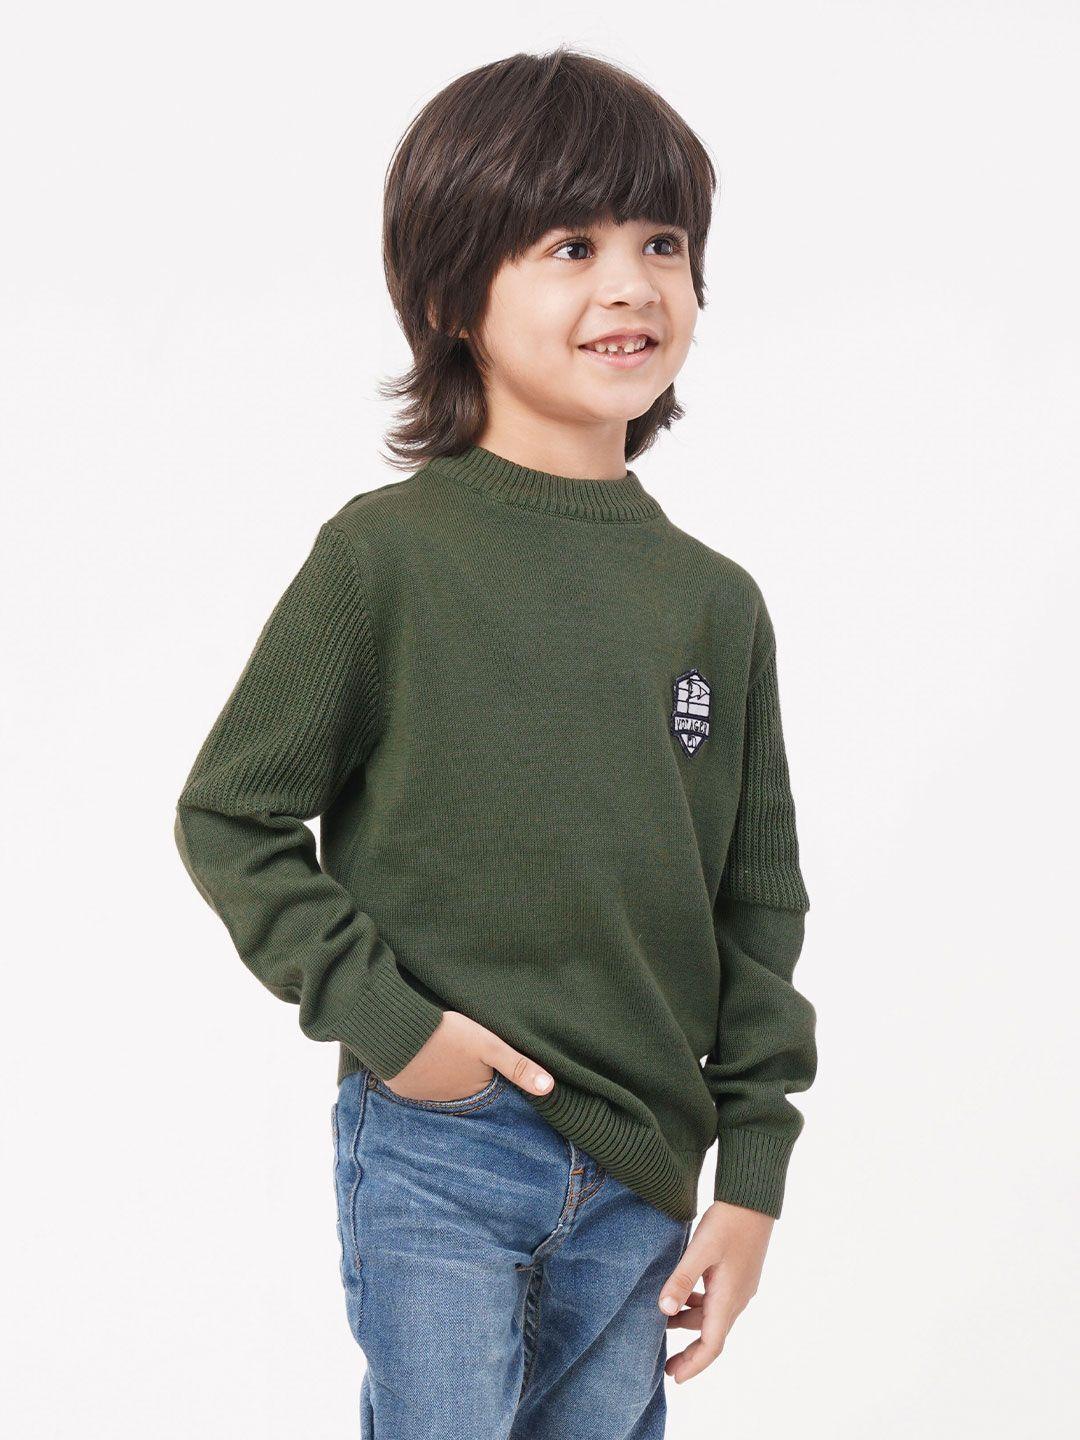 ed-a-mamma kids boys olive green long sleeves pleated pullover sweater